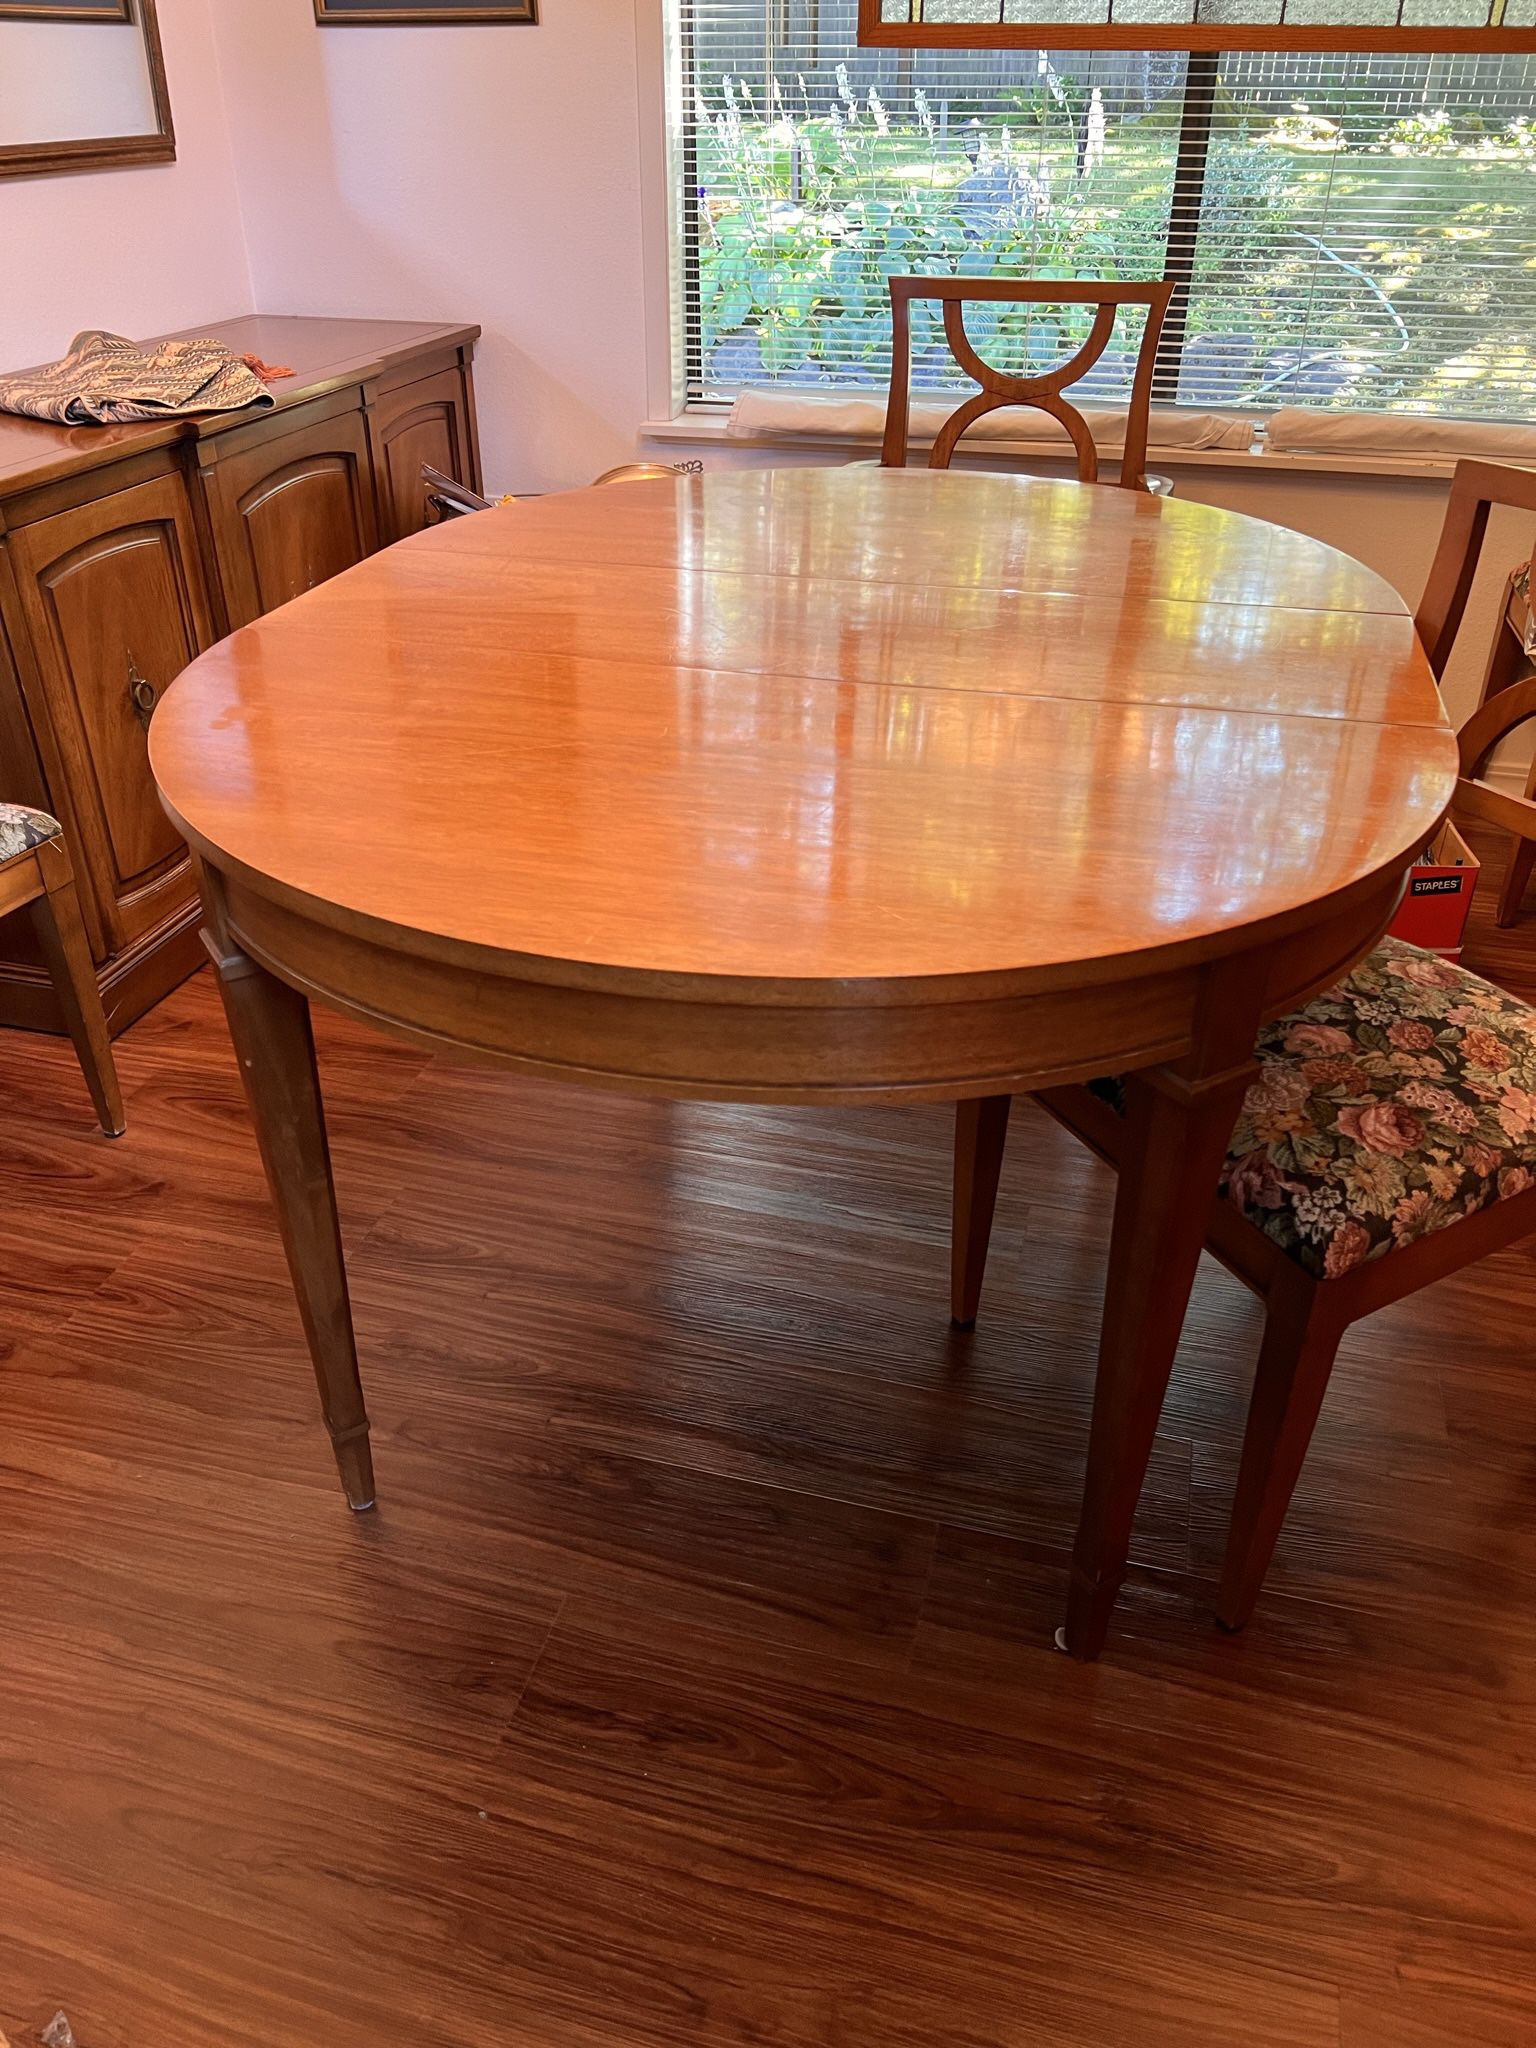 Correction On Size! Fabulous Deal.  Better Price Than Others Being Sold. One Price. 42” Drexel Dining Room Table & 3 Leaves 12”each & Matching Buffet!